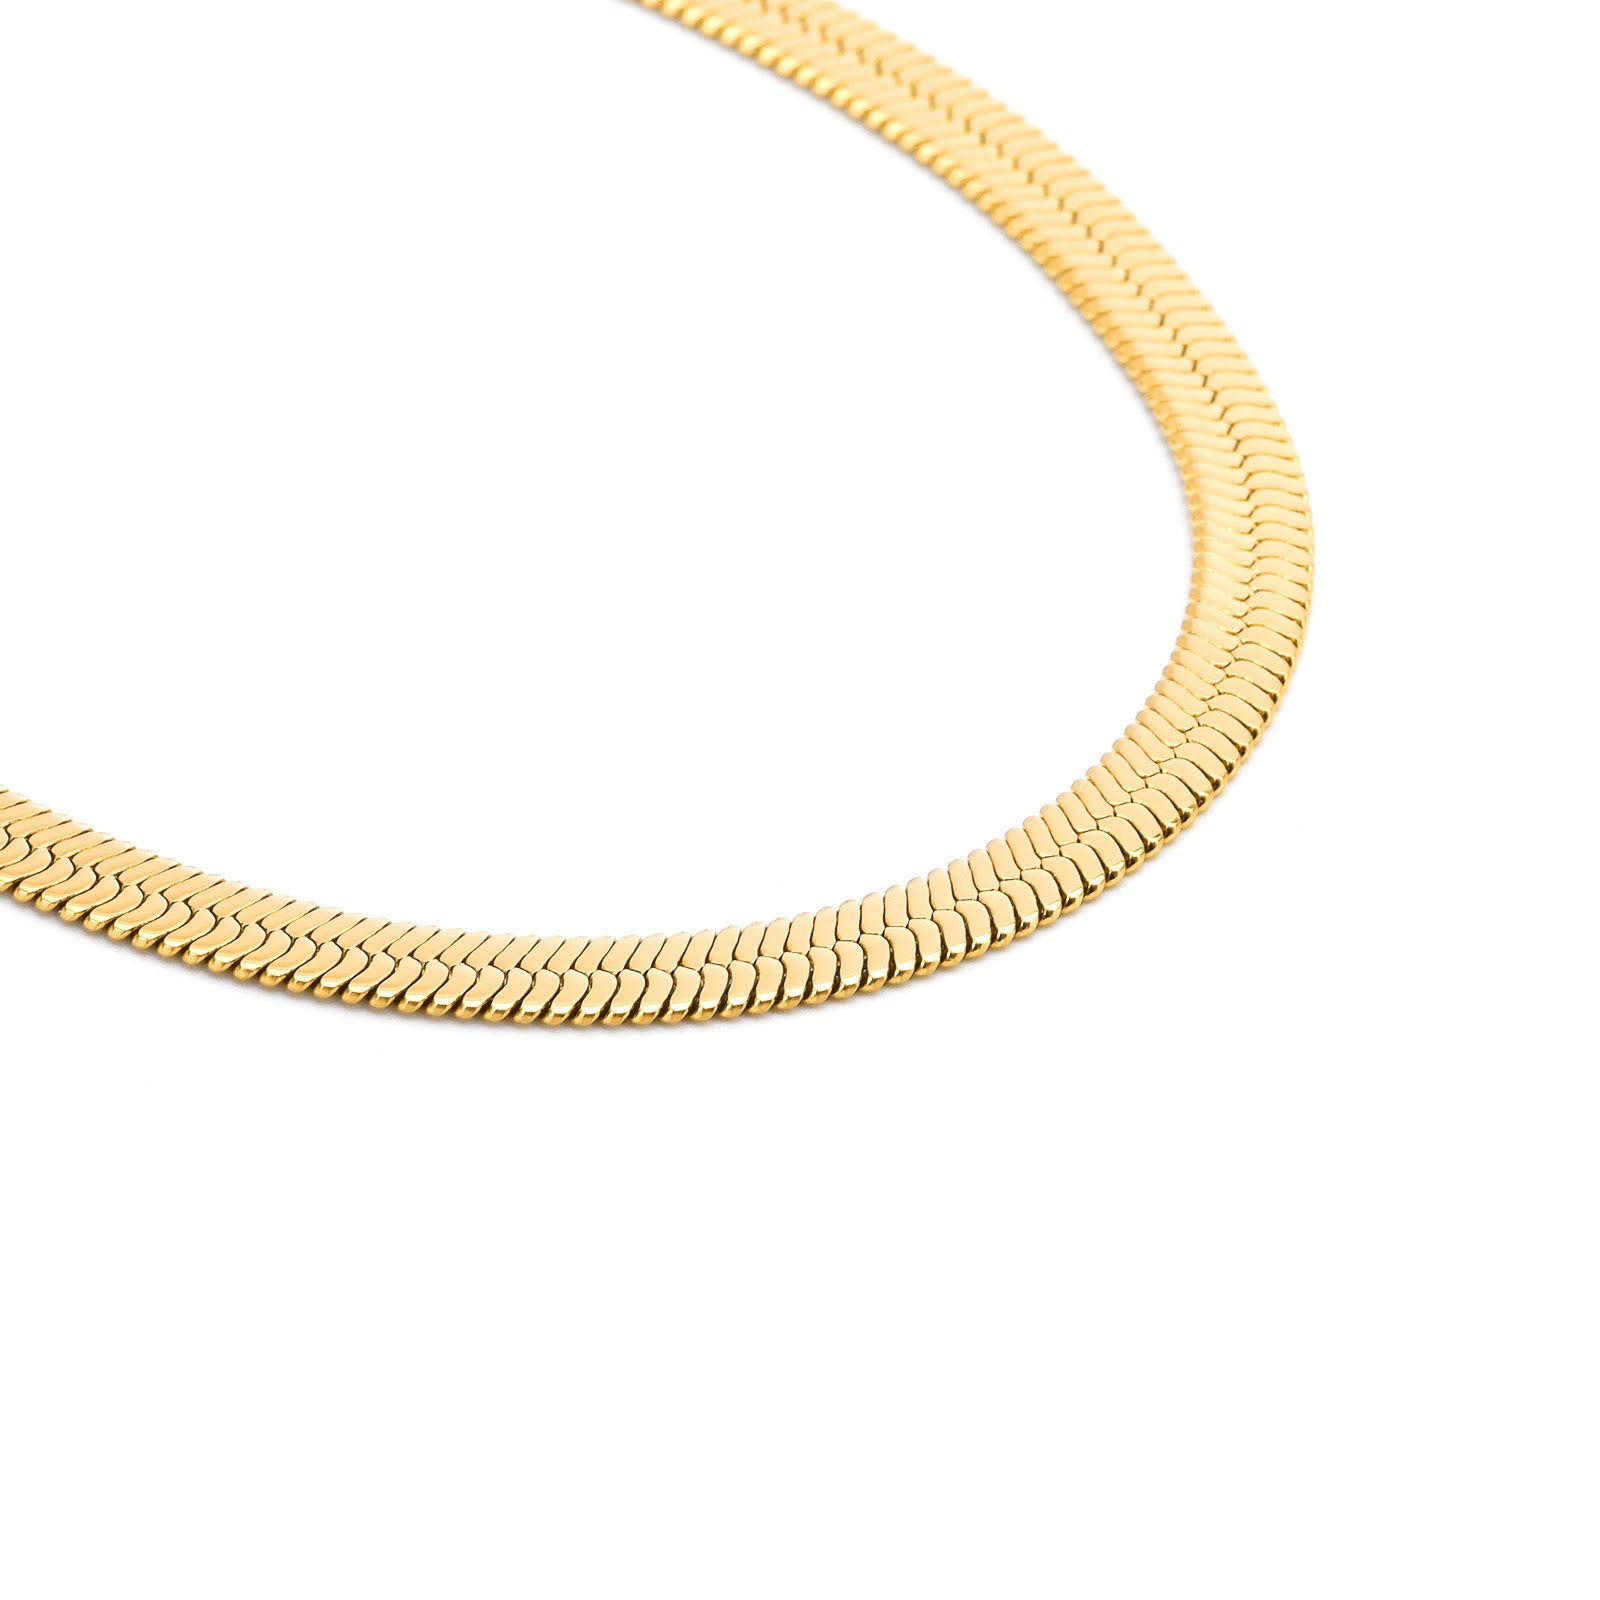 18k Gold Filled 3.0mm Herringbone Chain Necklace